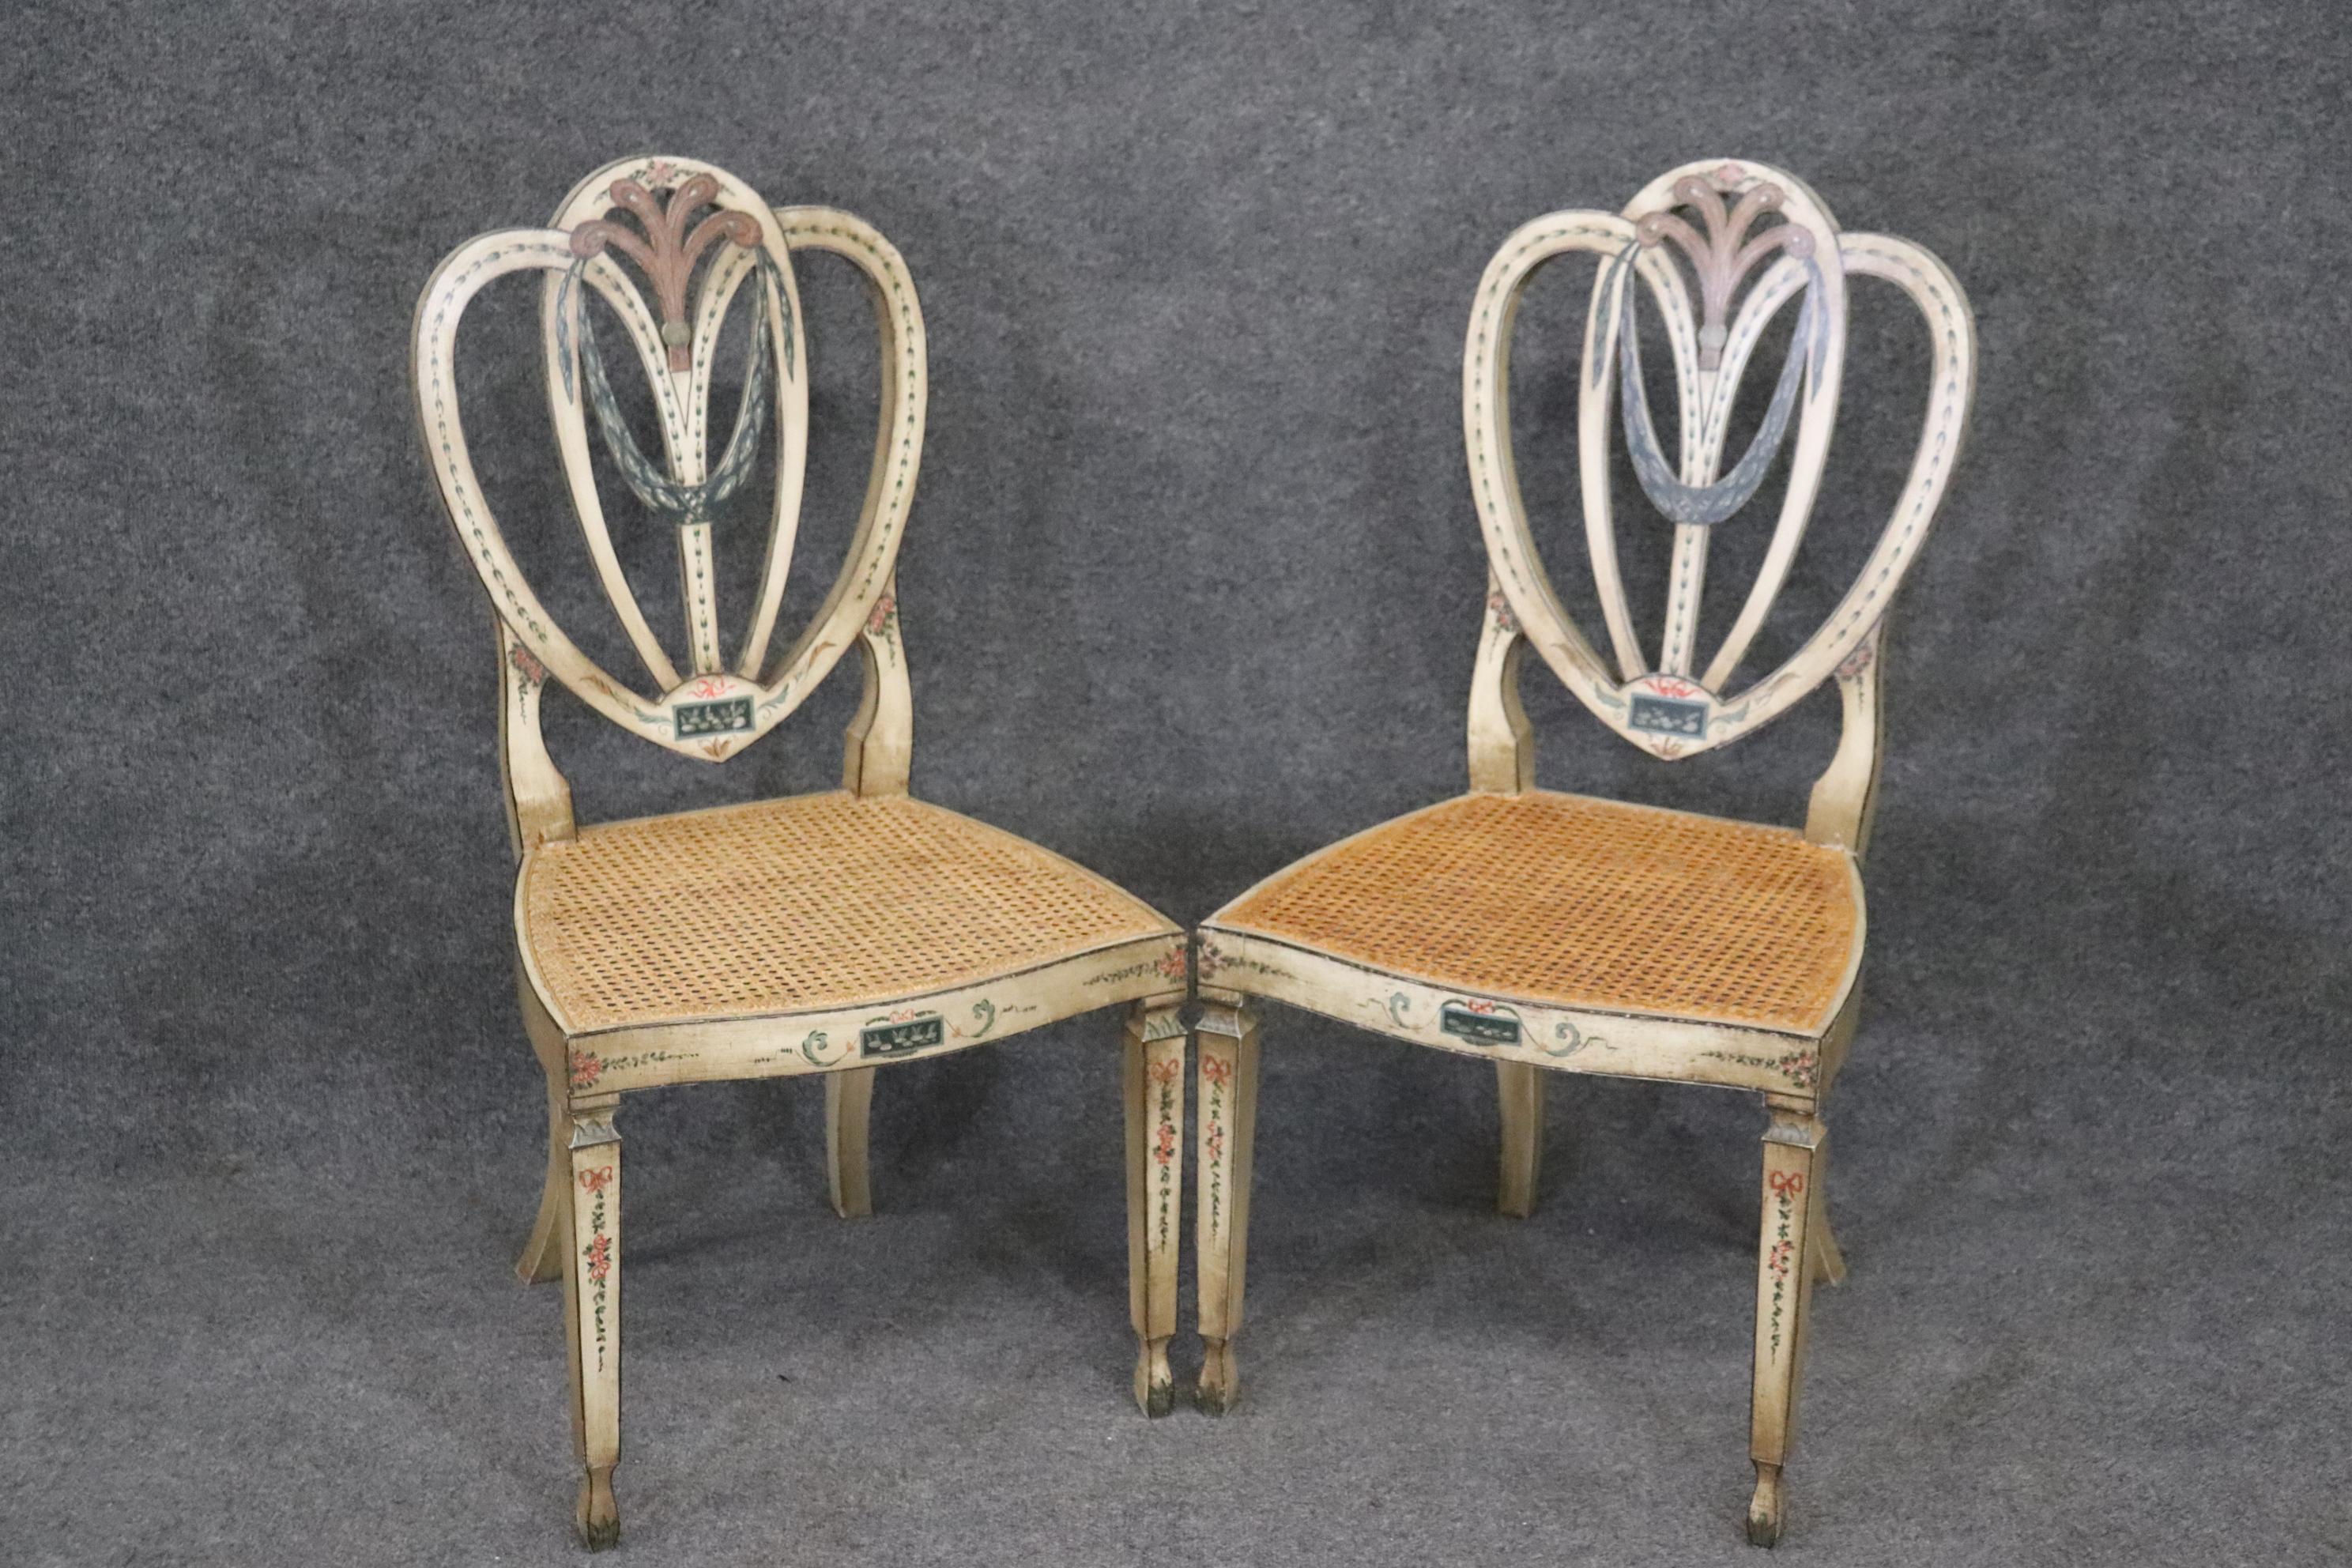 This is a stunning pair of Adams side chairs with good cane seating and beautiful painted floral decoration. The chairs are in good condition for 100 year old chairs. They measure 38.25 tall x 19.5 wide x 20.25 deep and have a 17 inch seat height.